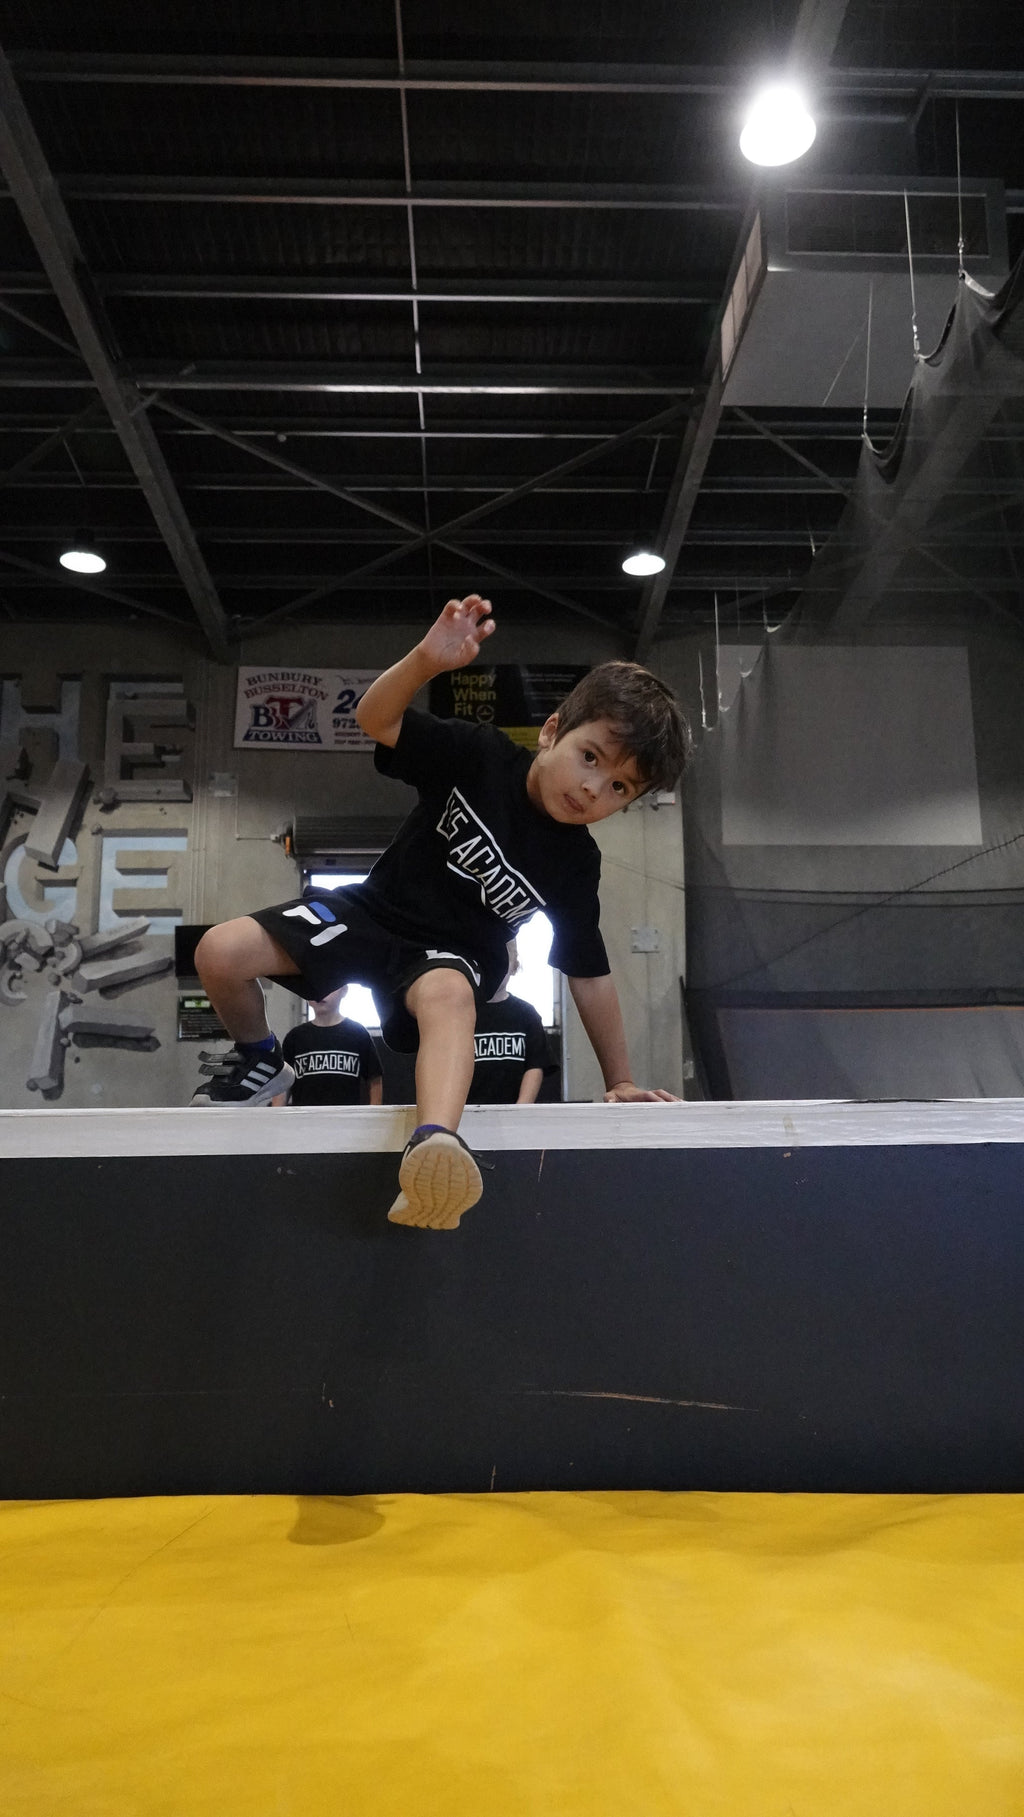 PEE-WEE PARKOUR:   . 3-4 YRS WEDNESDAY 9:00-9:30 TERM 2